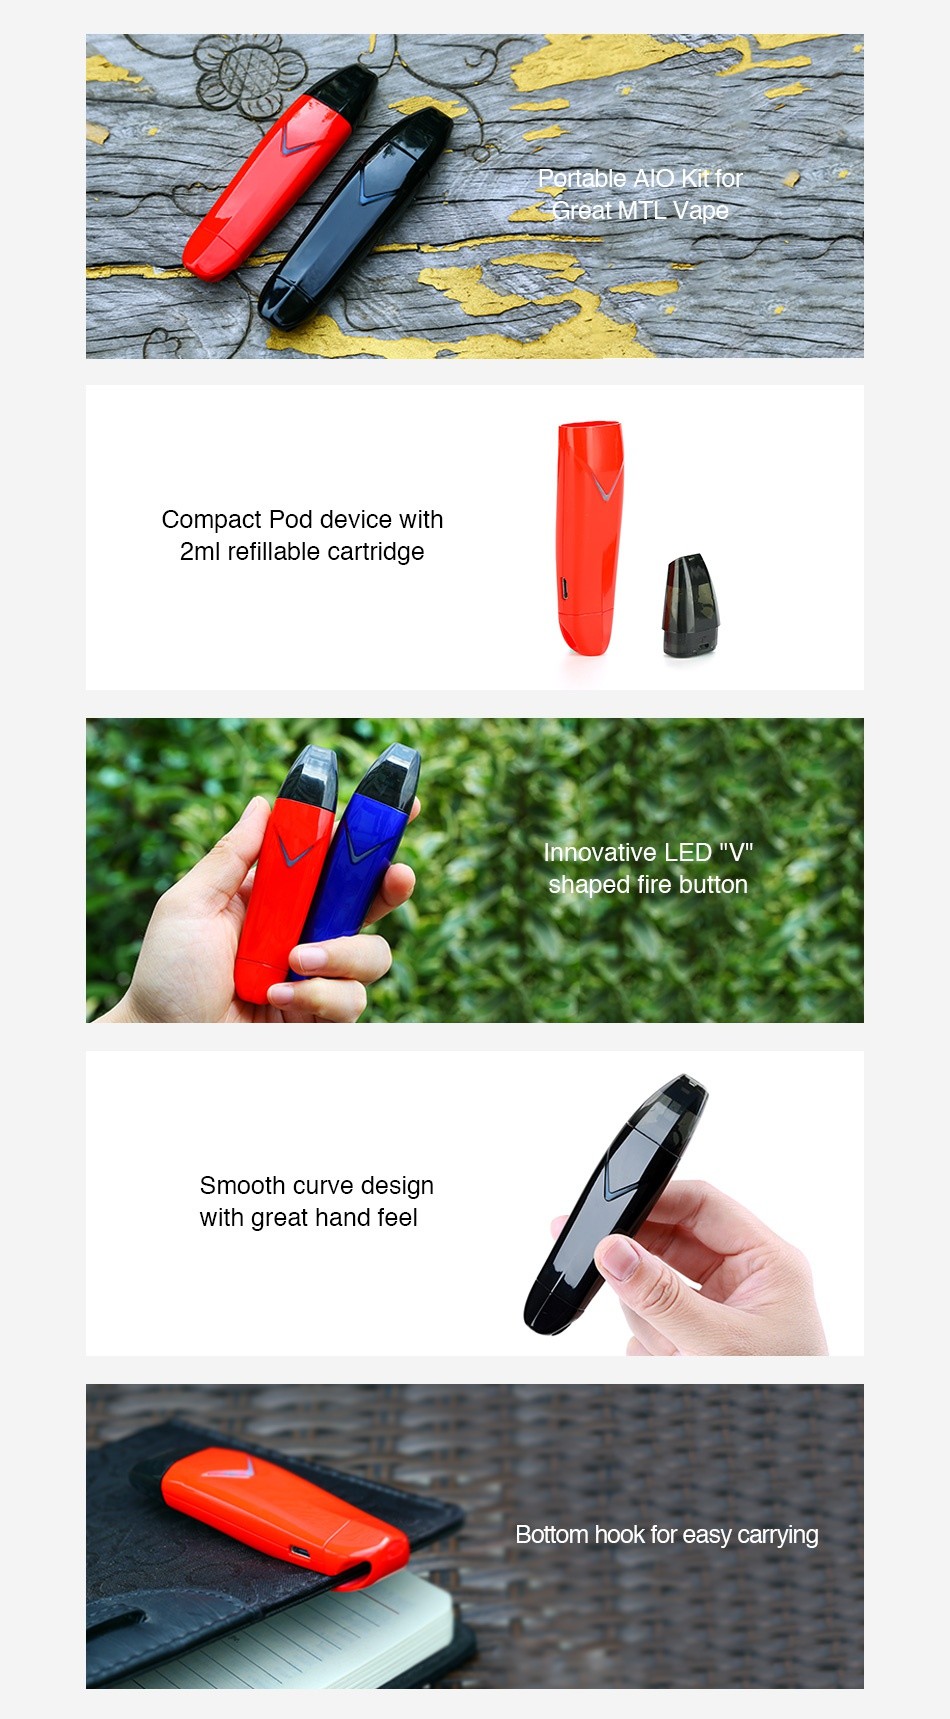 Suorin Vagon Starter Kit 430mAh able Alo  Kitfo eat MTL Compact pod device with 2ml refillable cartridge Innovative LEDV shaped fire button Smooth curve design with great hand feel Bottom hook for easy carrying